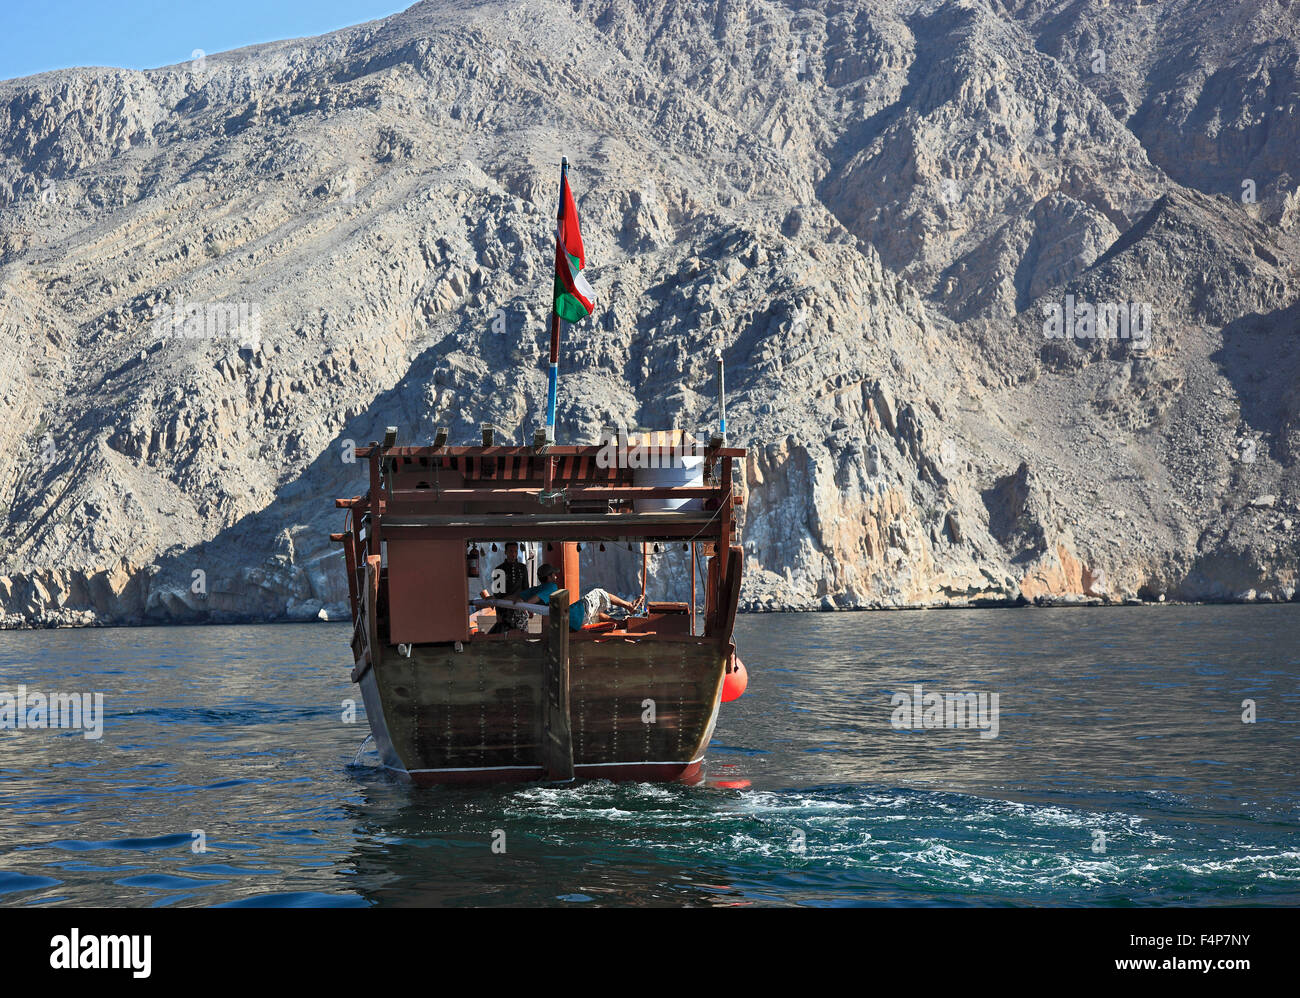 Dhau in the bays of Musandam, Shimm strait, in the granny's niches enclave of Musandam, Oman Stock Photo